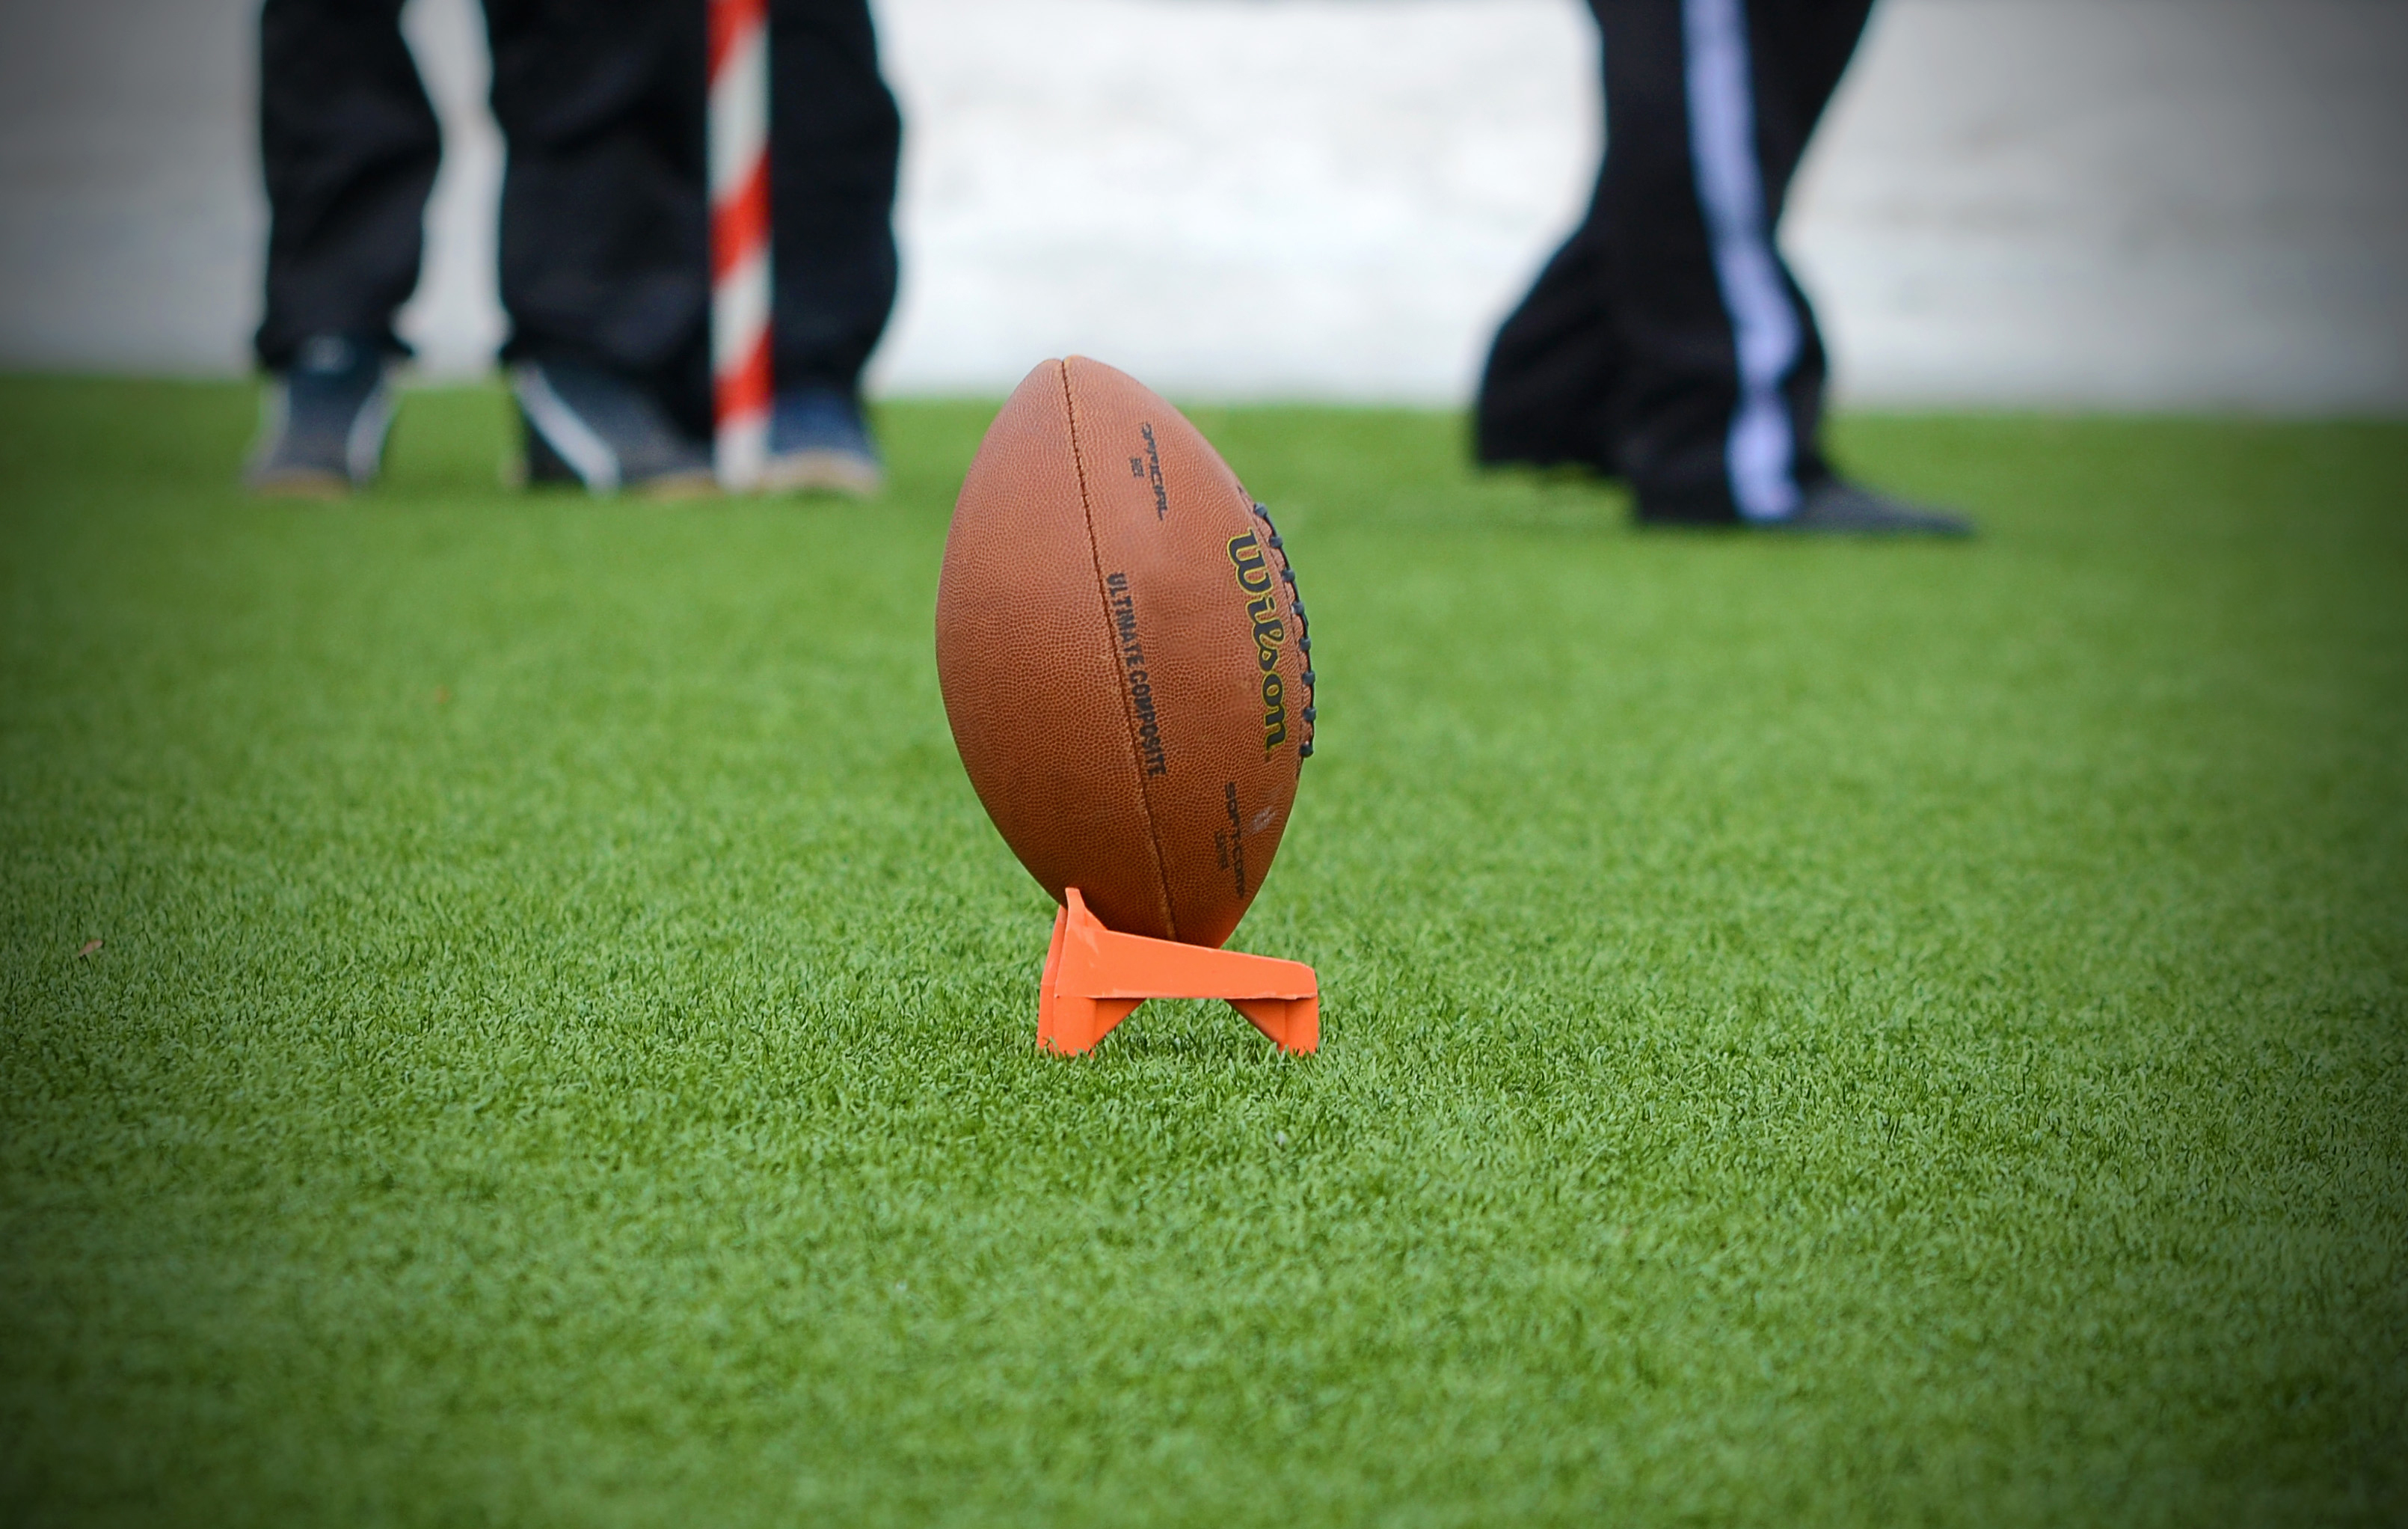 Picture of a football on a grassy field with people's legs visible in the background